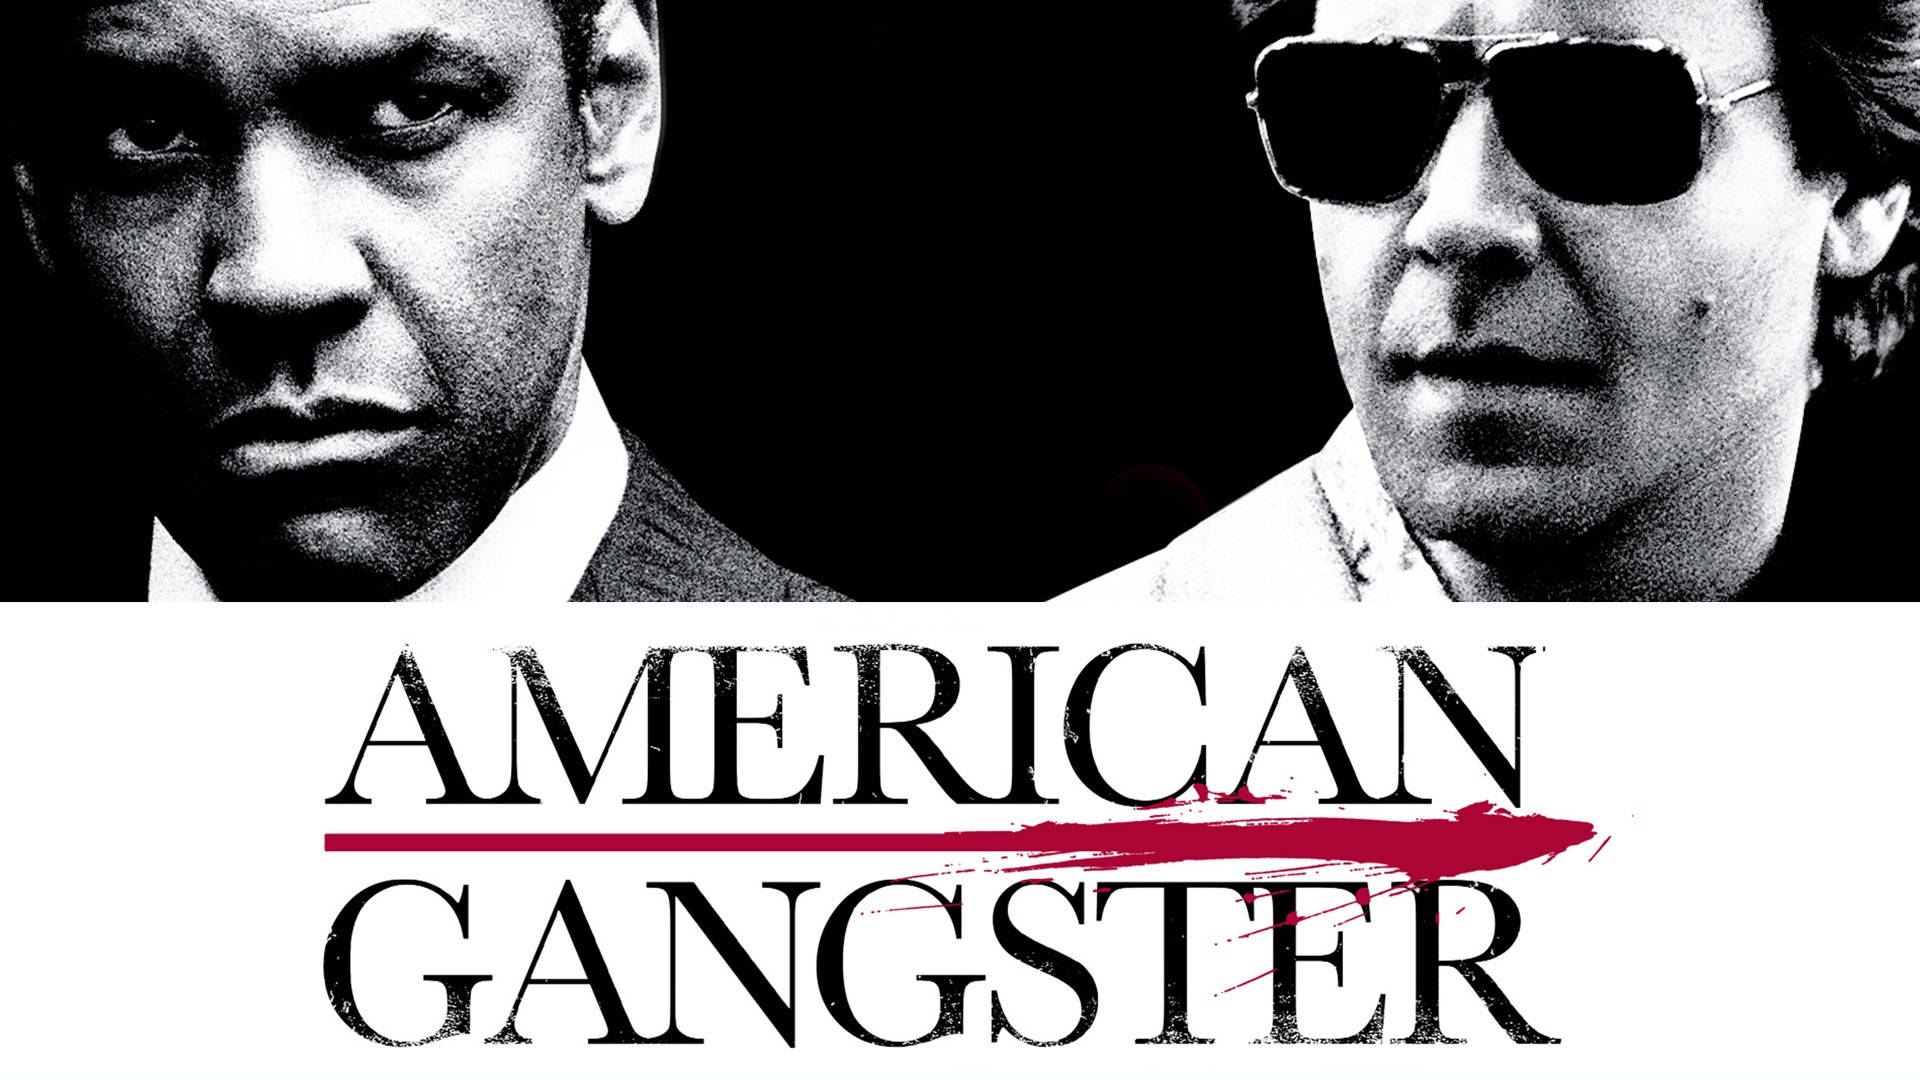 The American Gangster Background